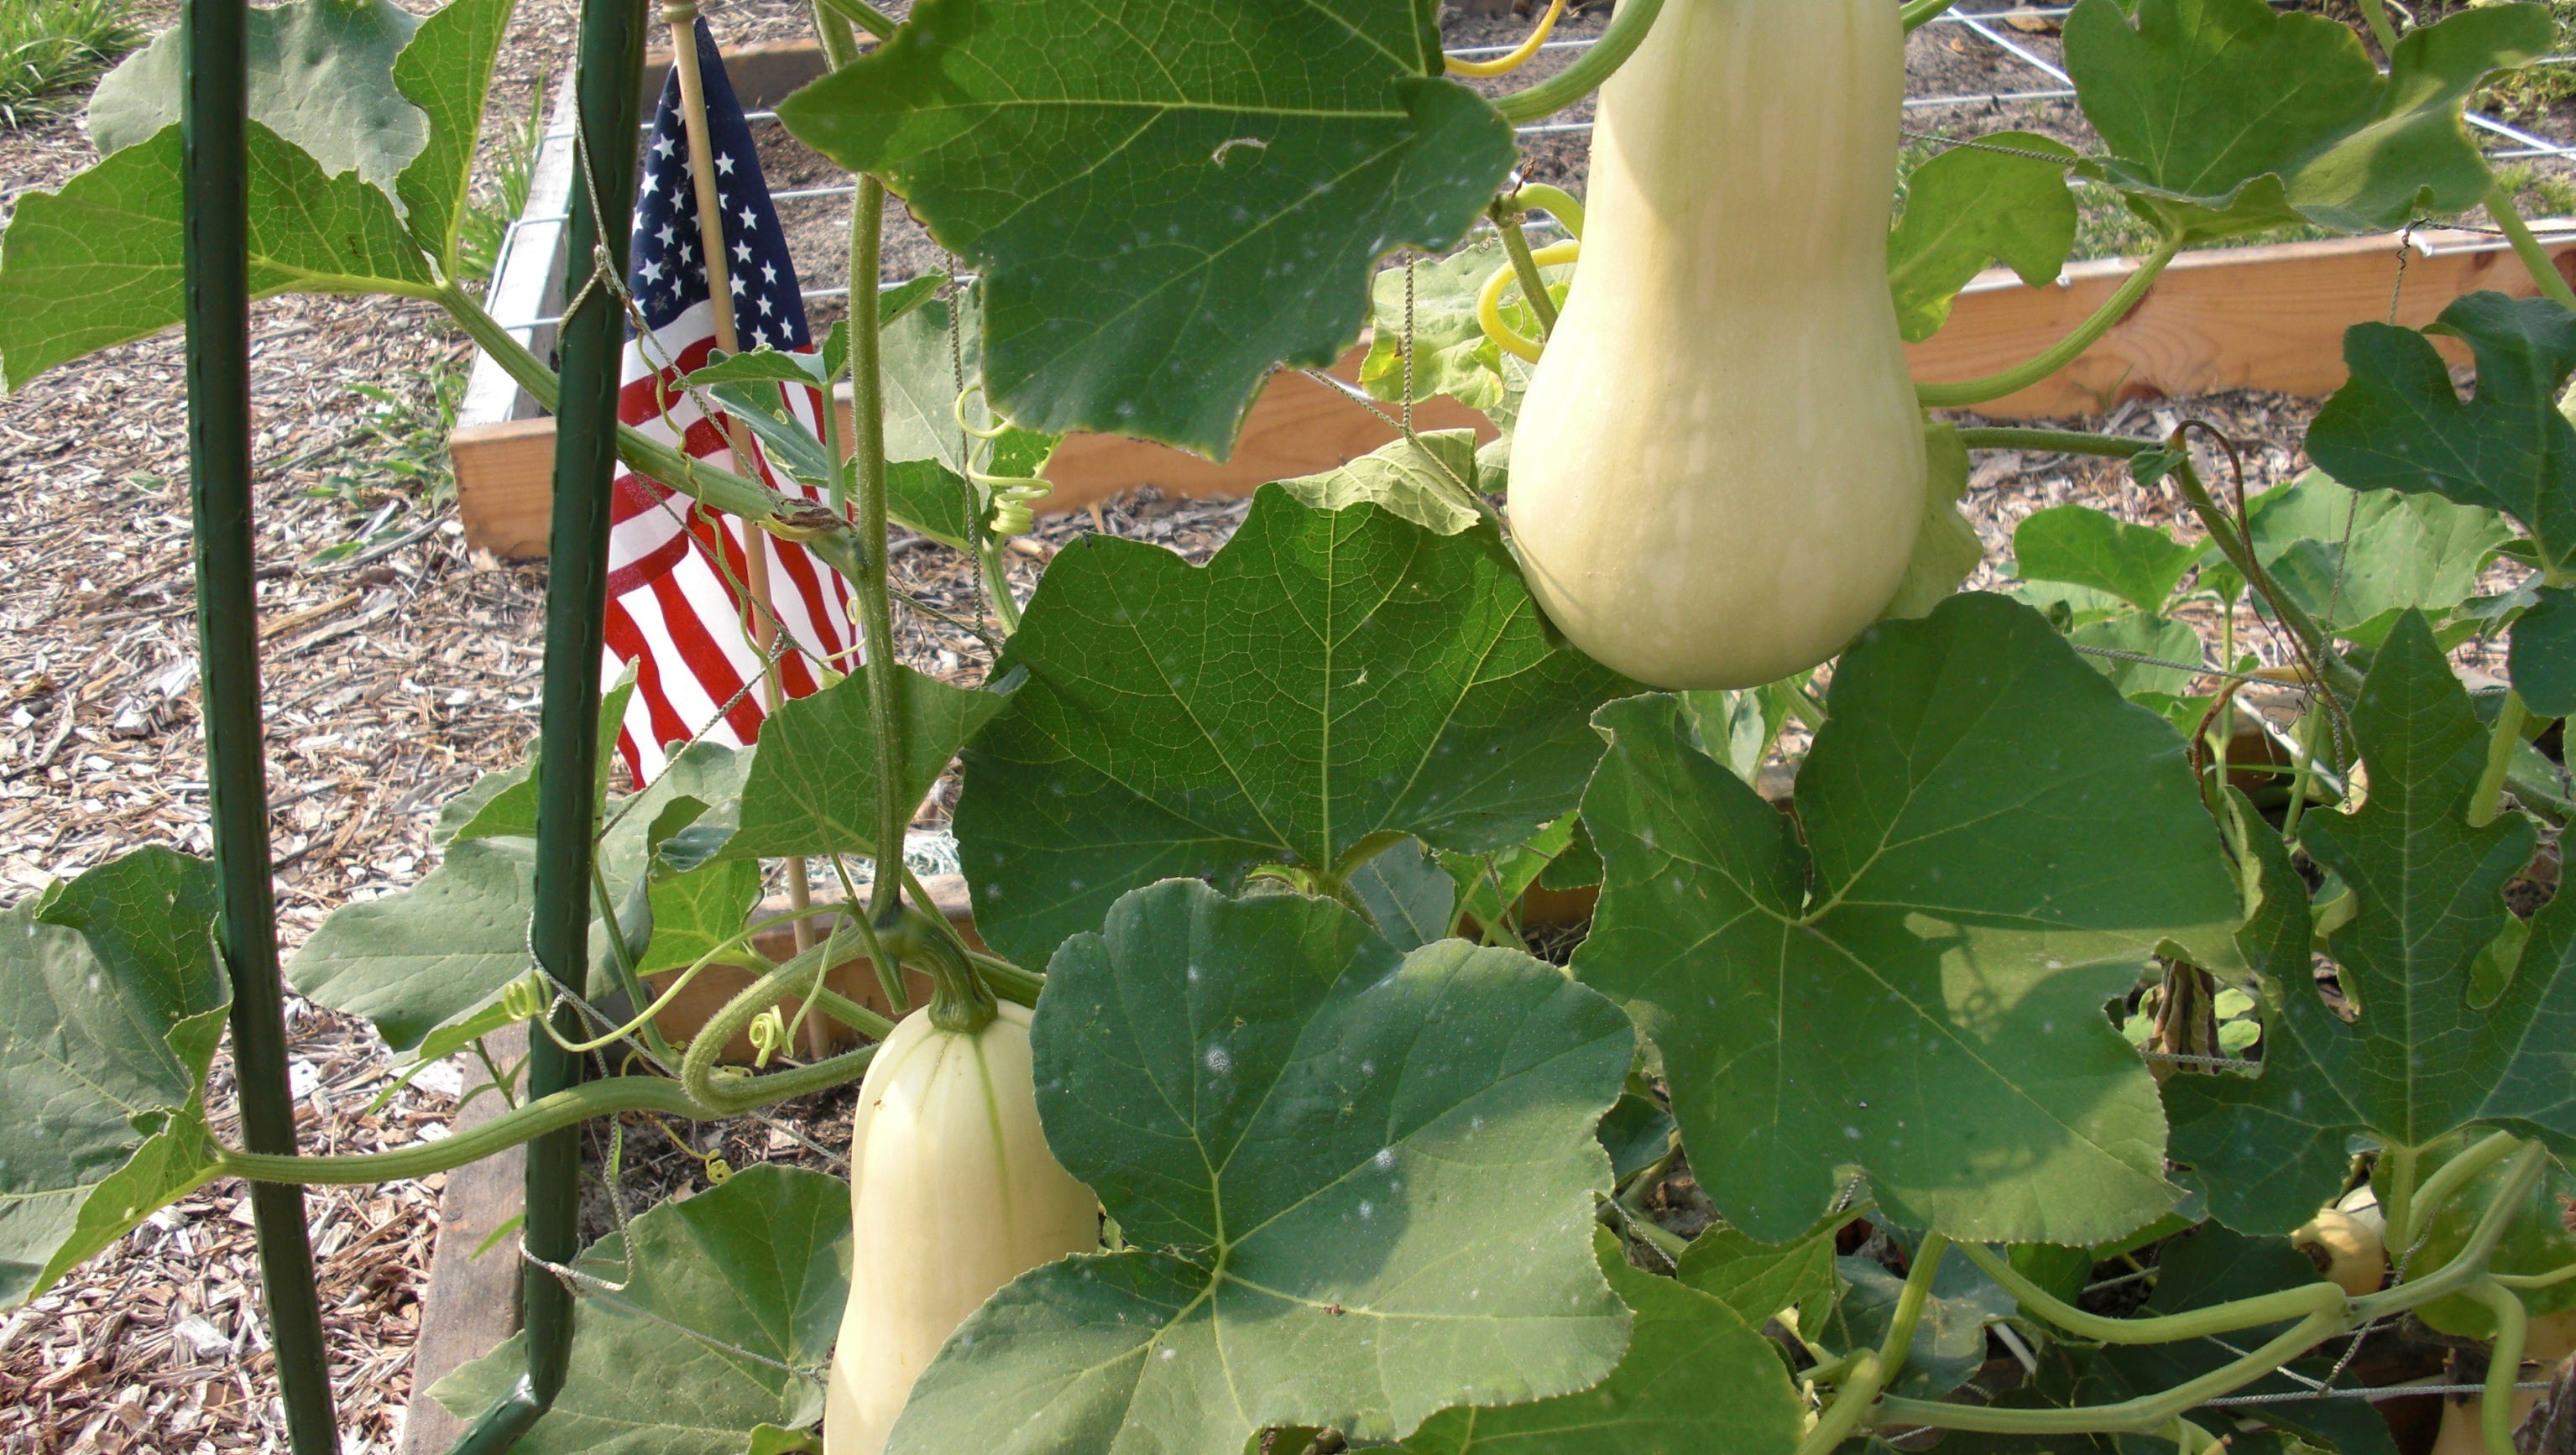 Spring is time to think about growing winter squash